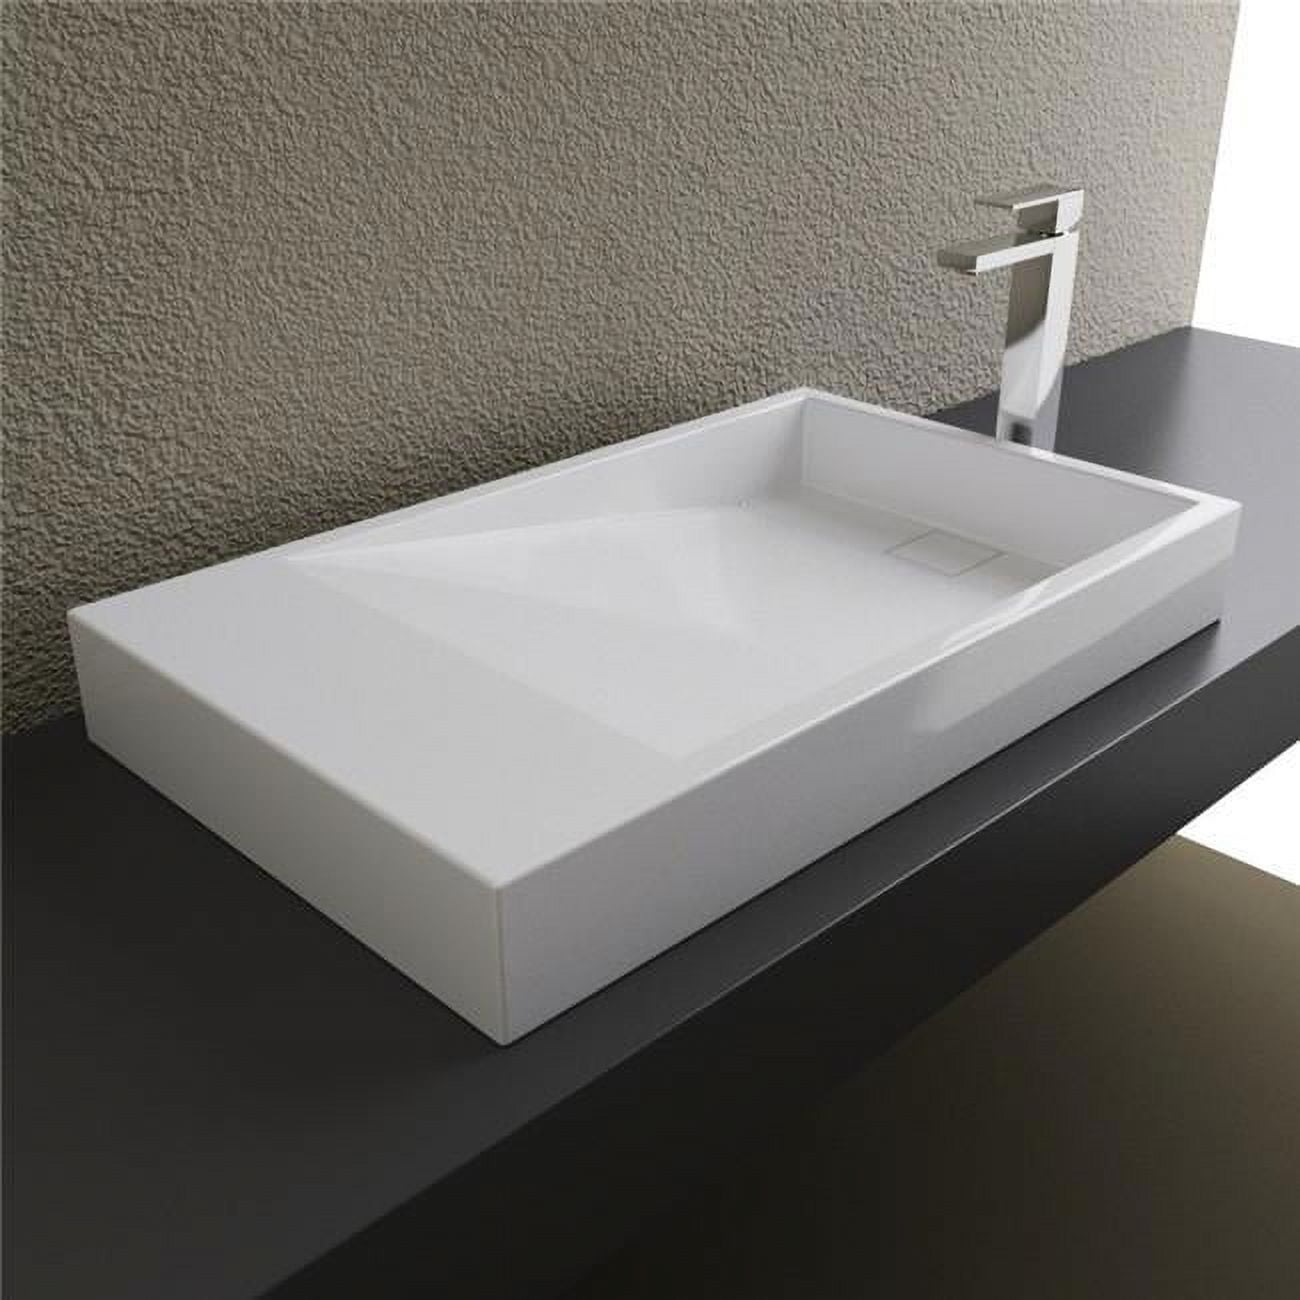 St-30184 Solid Surface Above Counter Bathroom Sink, White